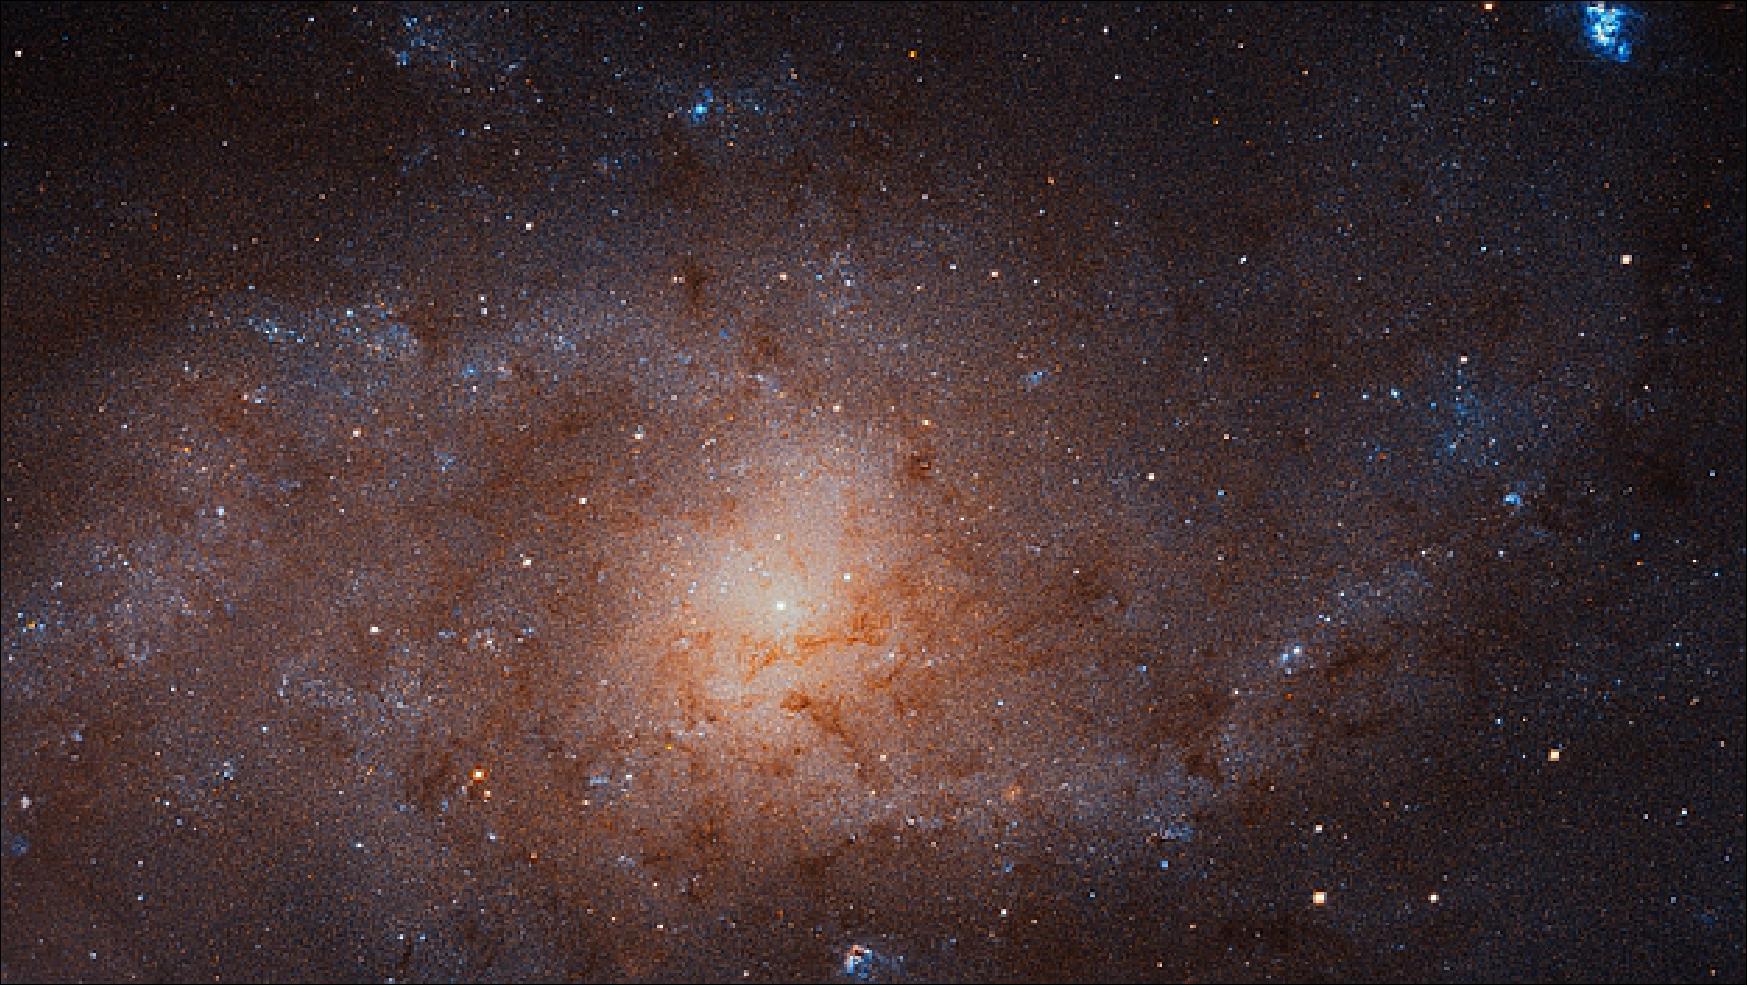 Figure 83: This gigantic image of the Triangulum Galaxy – also known as Messier 33 – is a composite of about 54 different pointings with Hubble's Advanced Camera for Surveys. With a staggering size of 34,372 times 19,345 pixels, it is the second-largest image ever released by Hubble. The mosaic of the Triangulum Galaxy showcases the central region of the galaxy and its inner spiral arms. Millions of stars, hundreds of star clusters and bright nebulae are visible. This image is too large to be easily displayed at full resolution and is best appreciated using the zoom tool [image credit: NASA, ESA, and M. Durbin, J. Dalcanton, and B. F. Williams (University of Washington)]